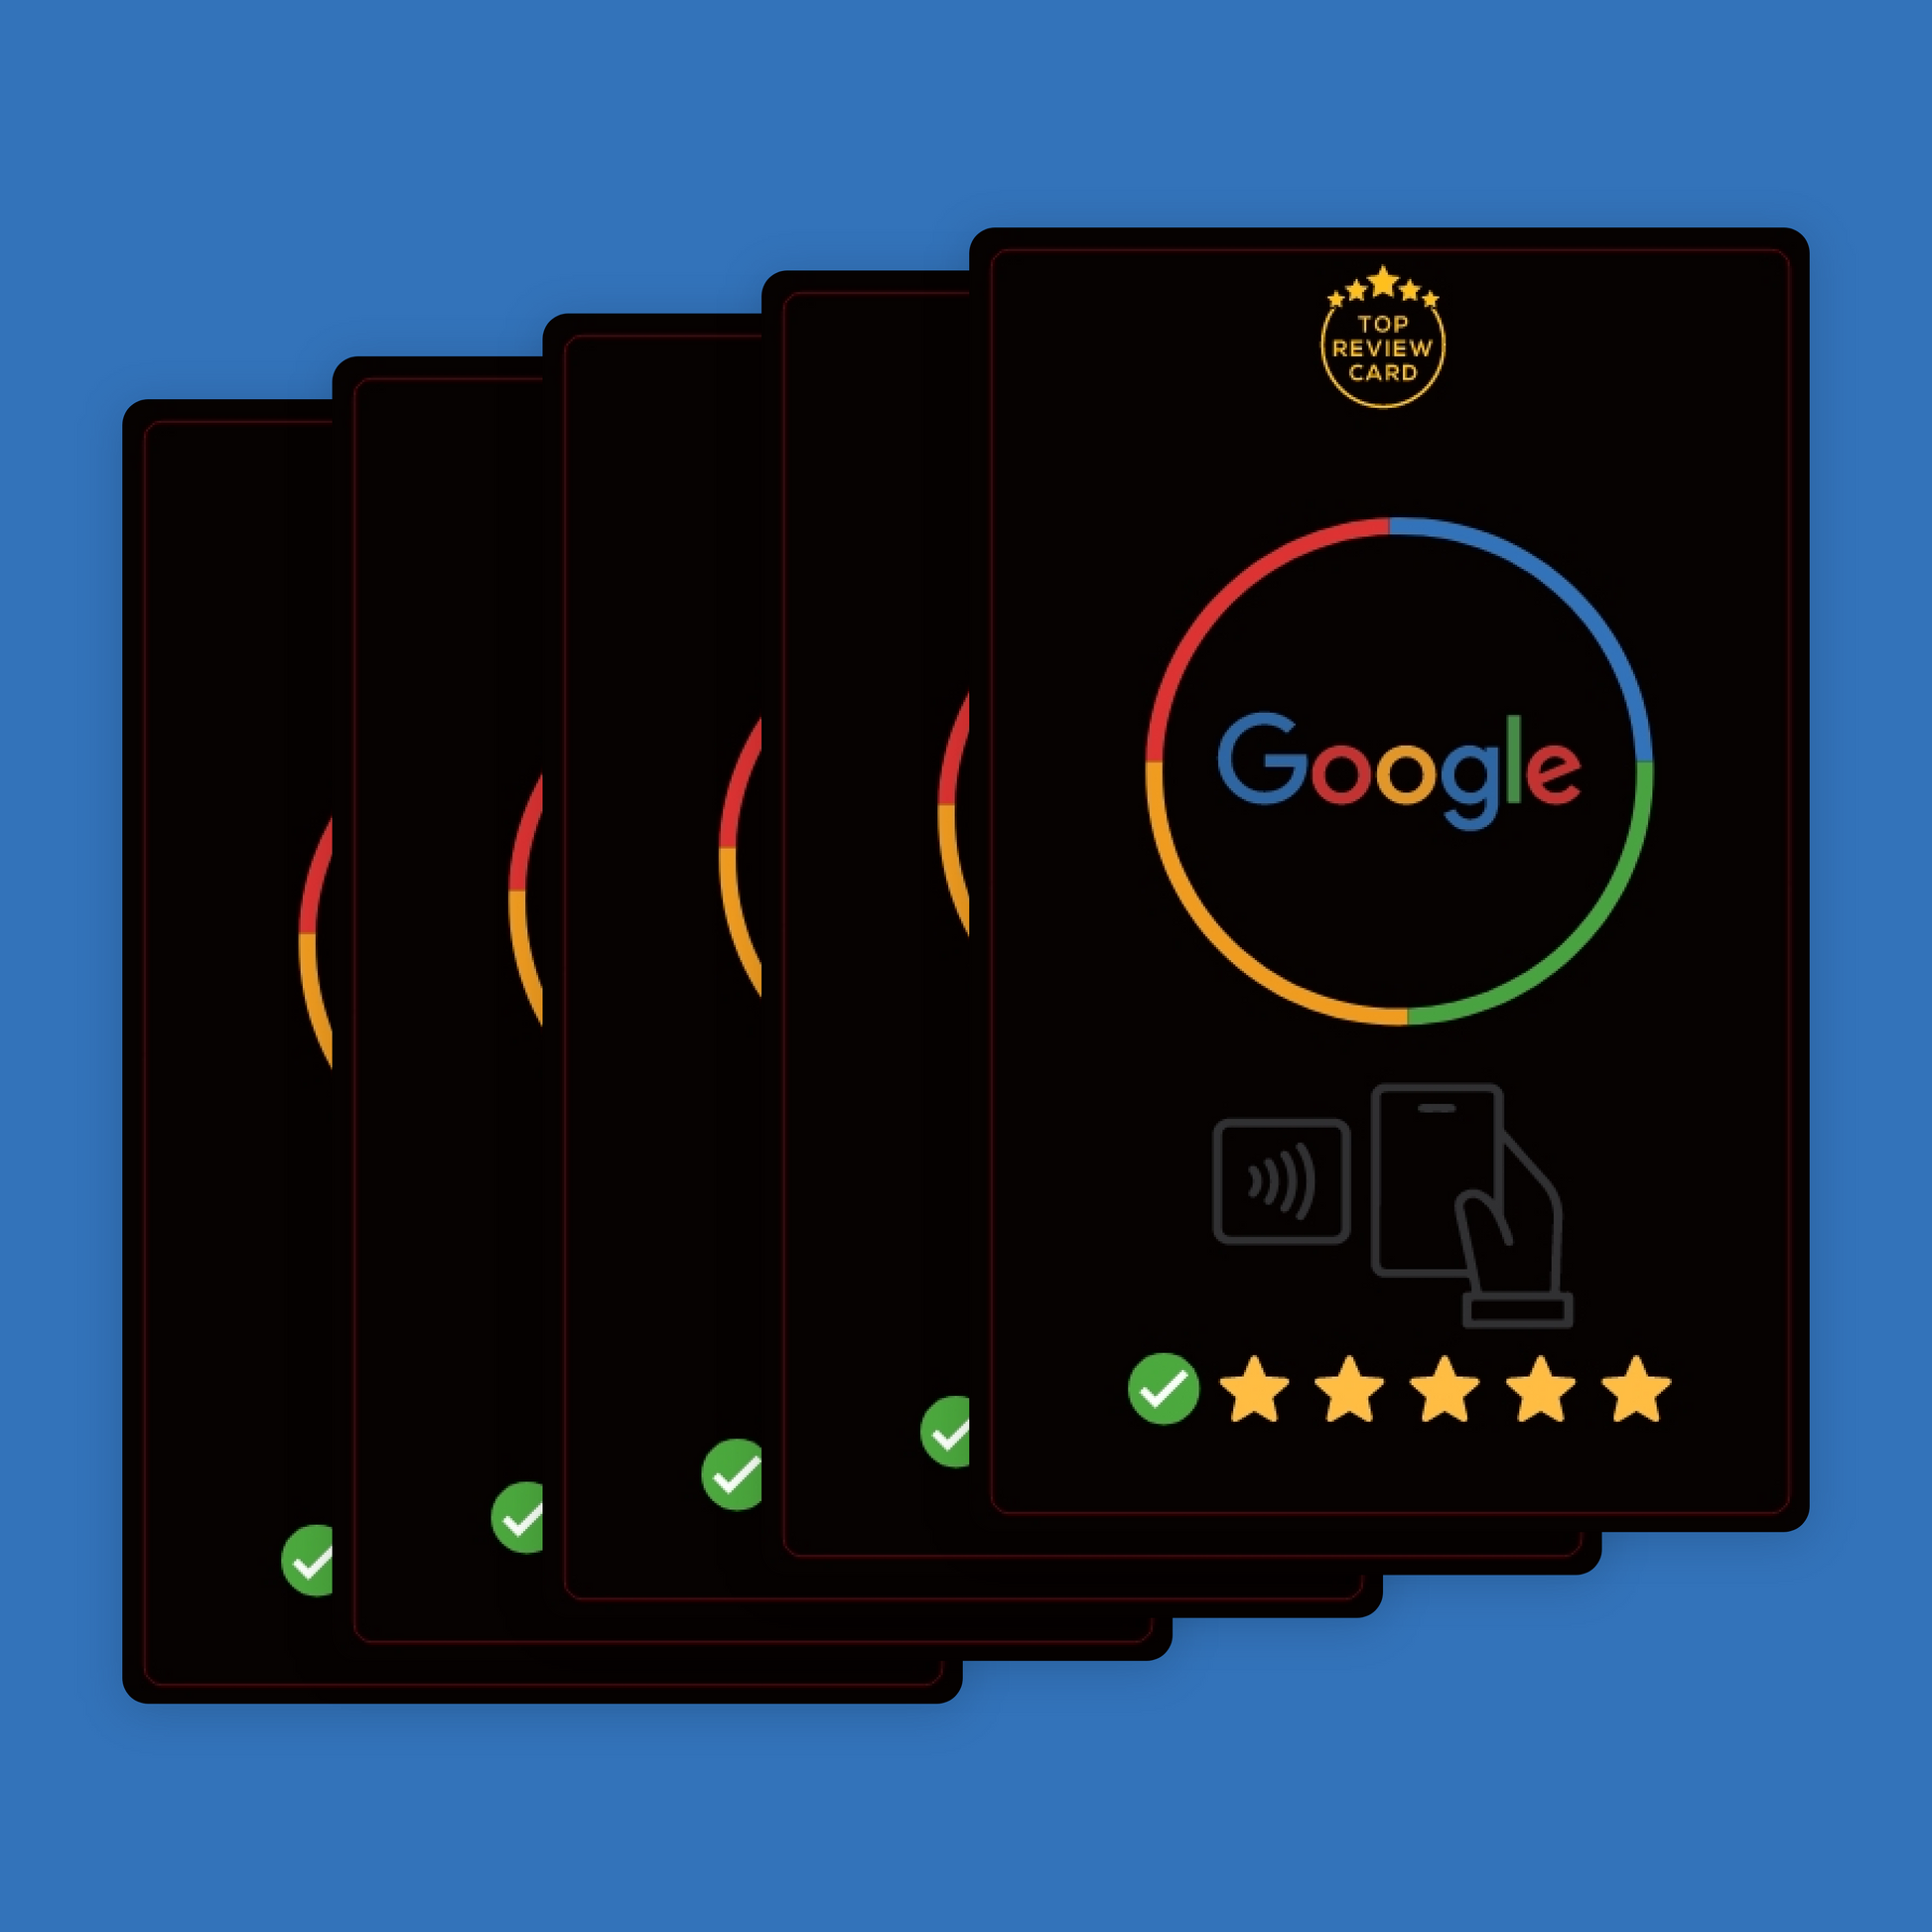 Your Brand's Voice Amplified Let your customers' voices shine! Our Google Review Cards put your brand's best reviews front and center, broadcasting positive feedback to the world.